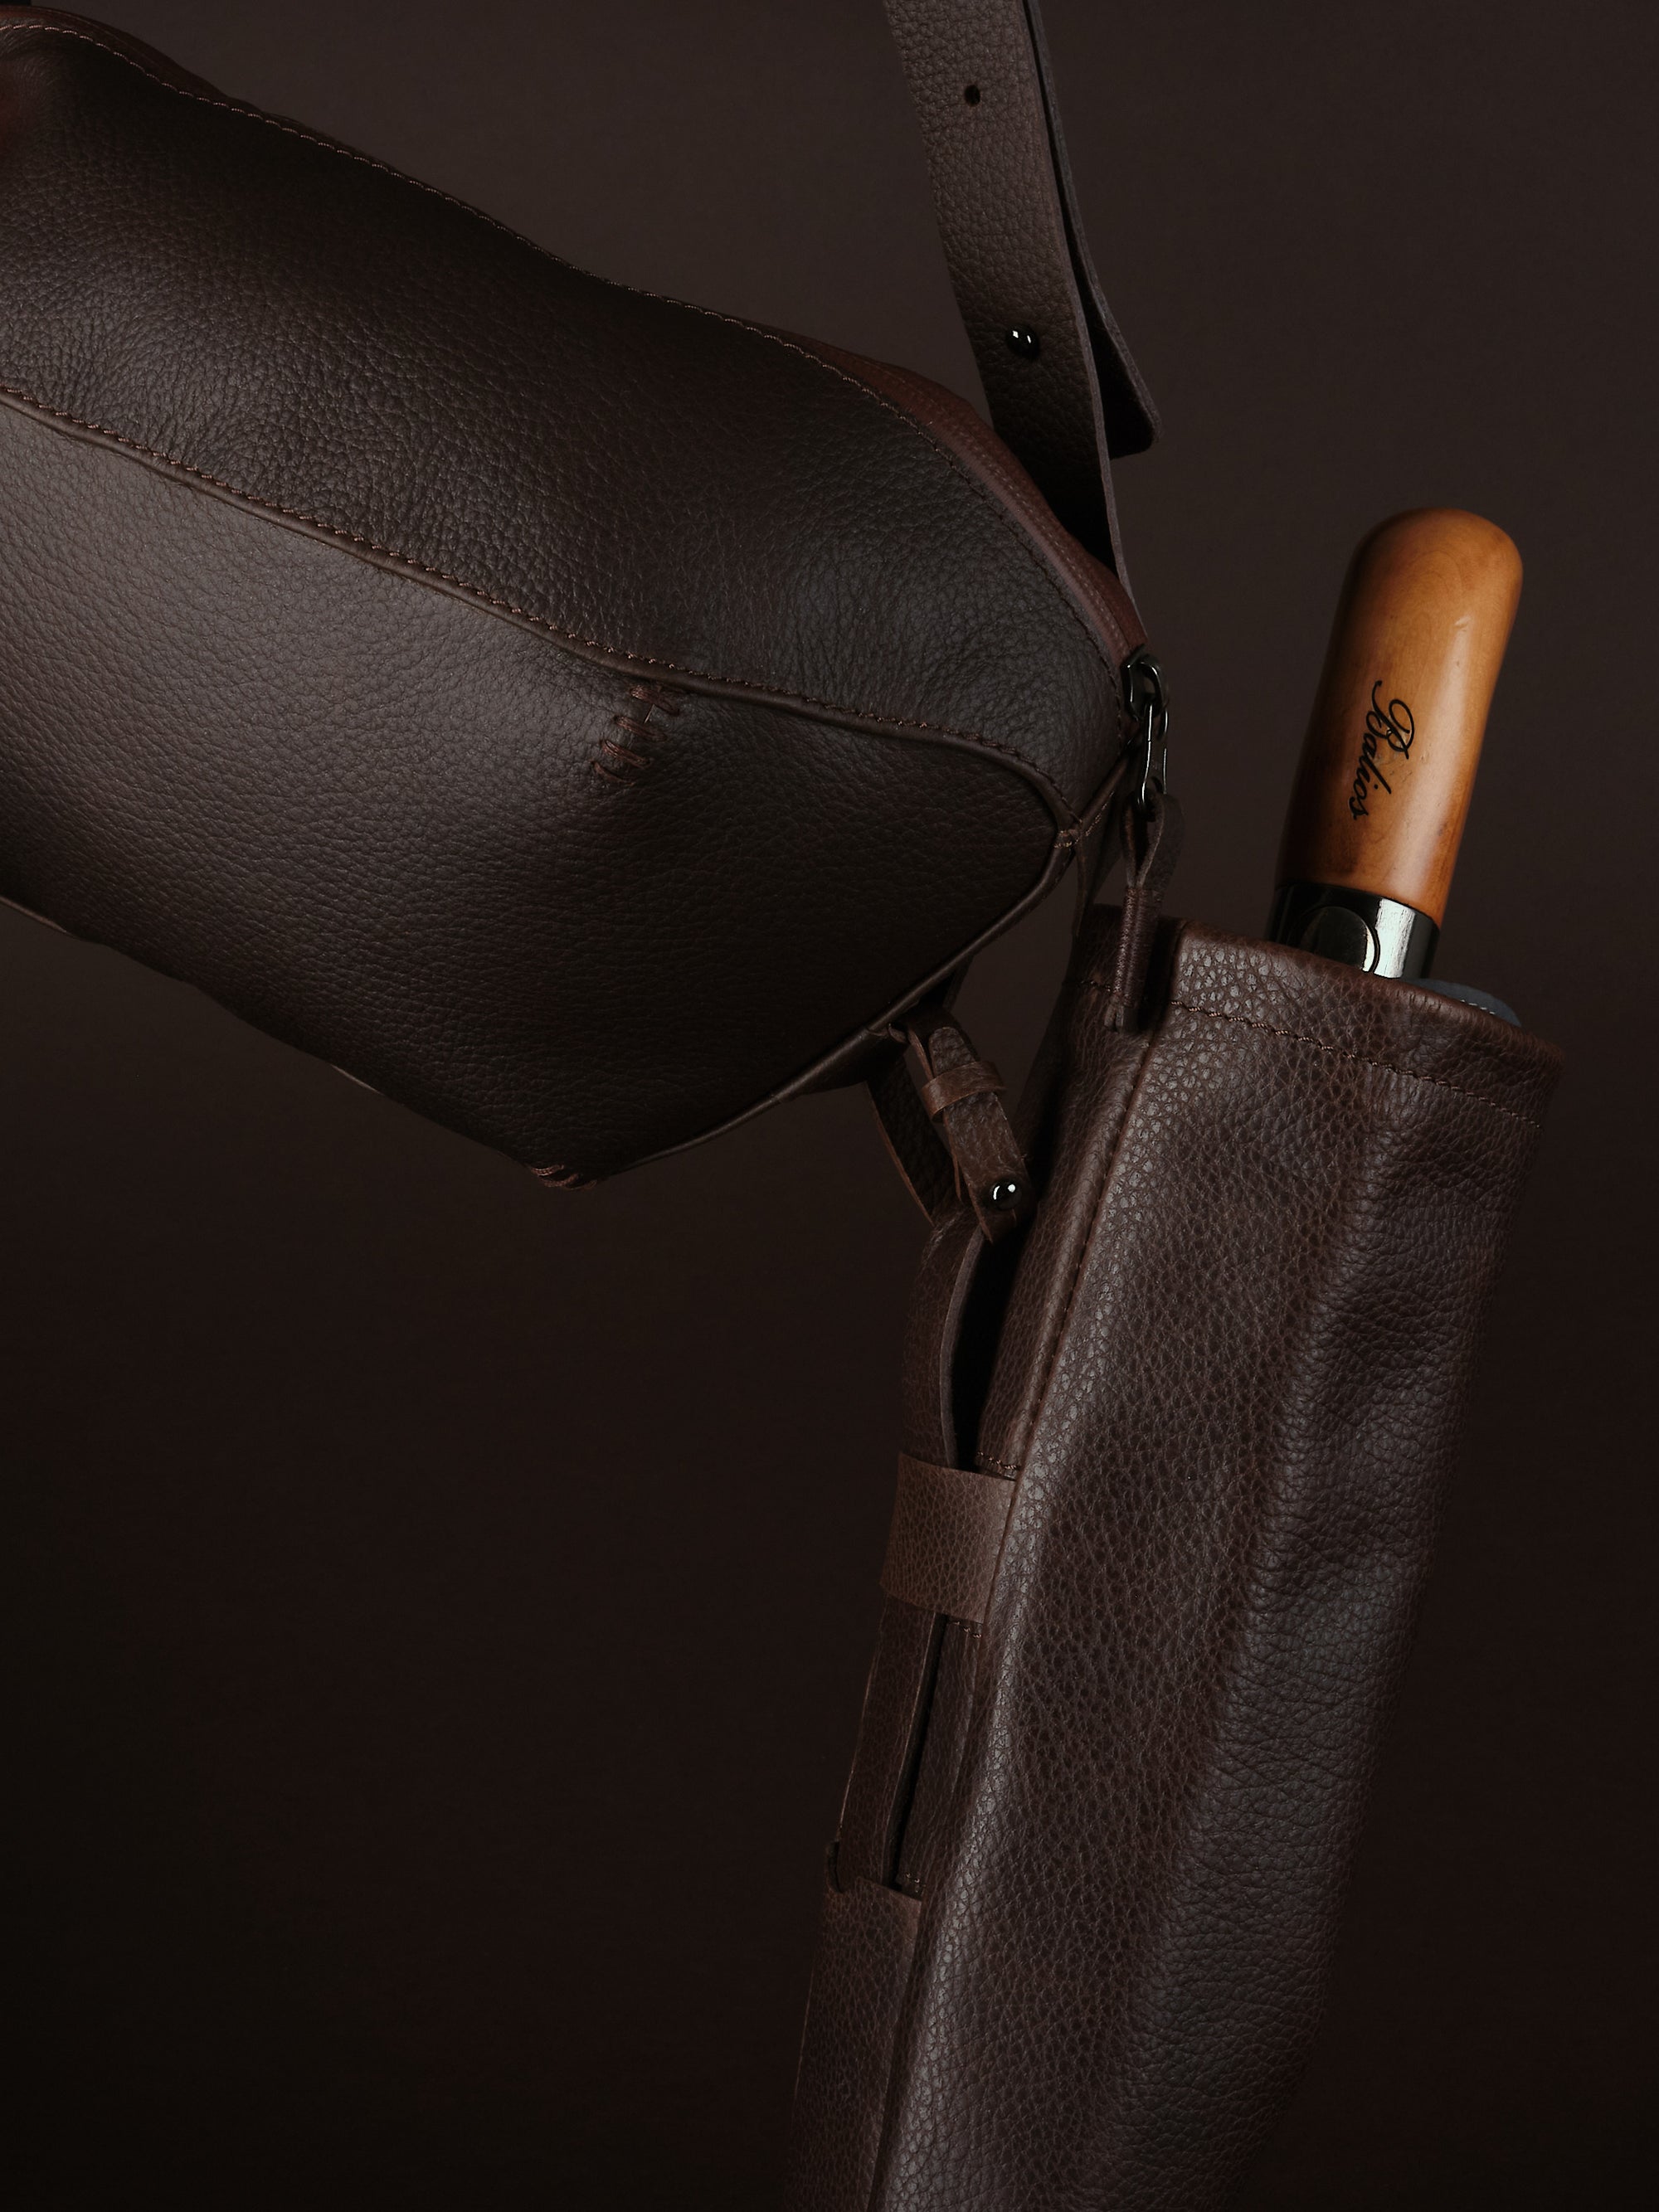 Leather bottle pouch. Sling Bag Men Dark Brown by Capra Leather